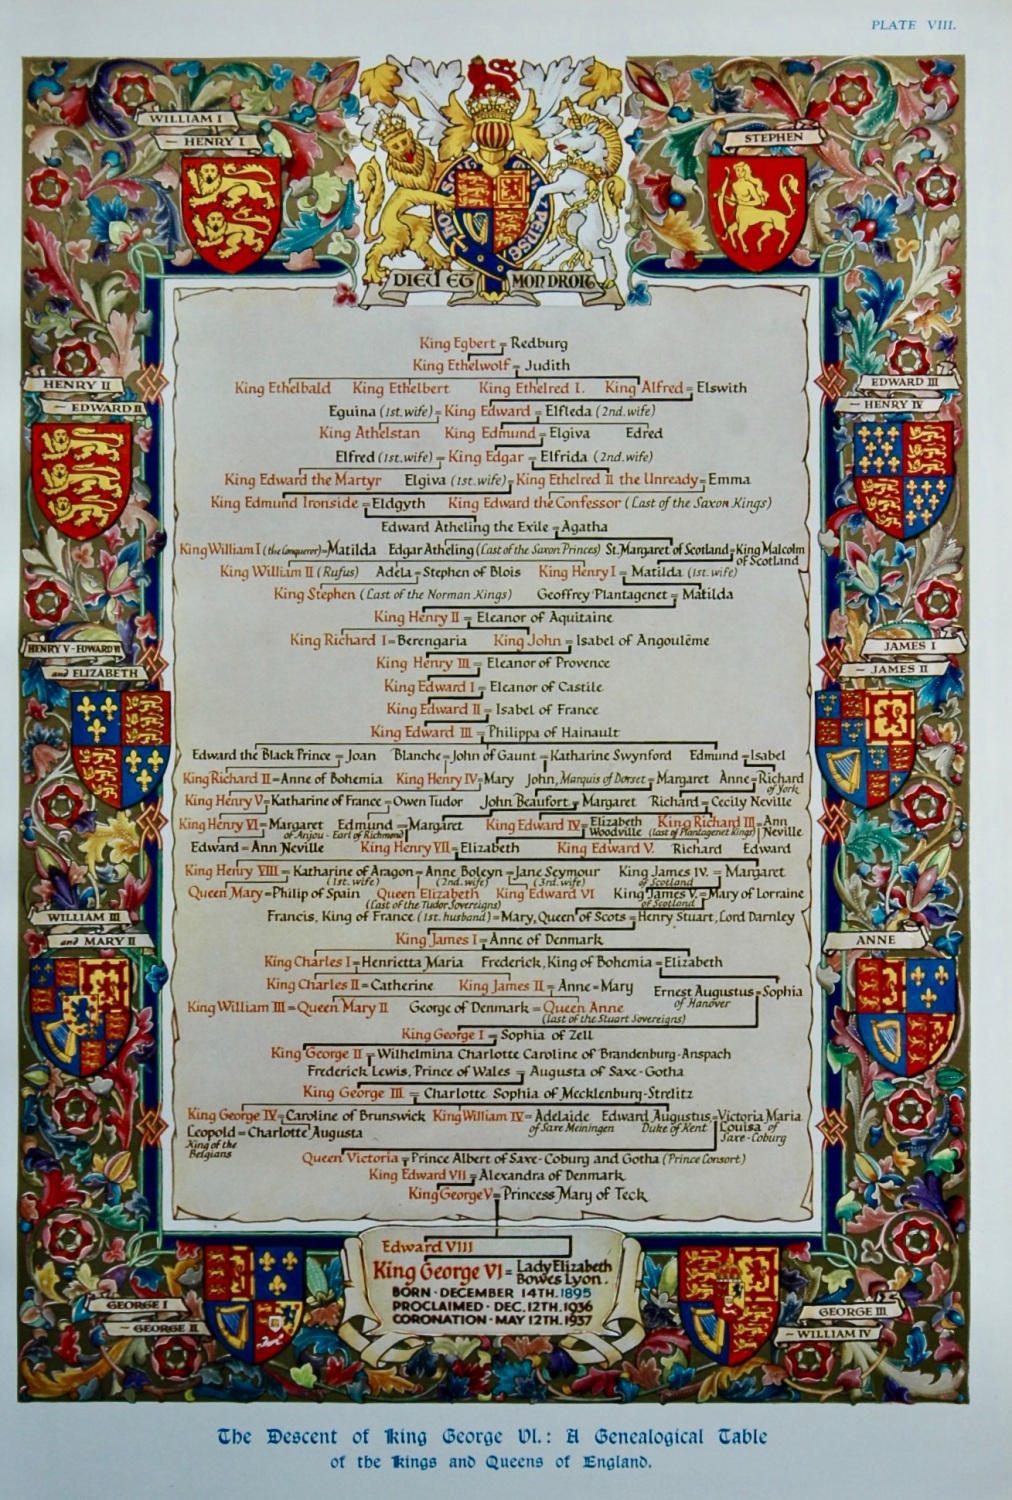 The Descent of King George VI. : A Genealogical Table of the Kings and Quee